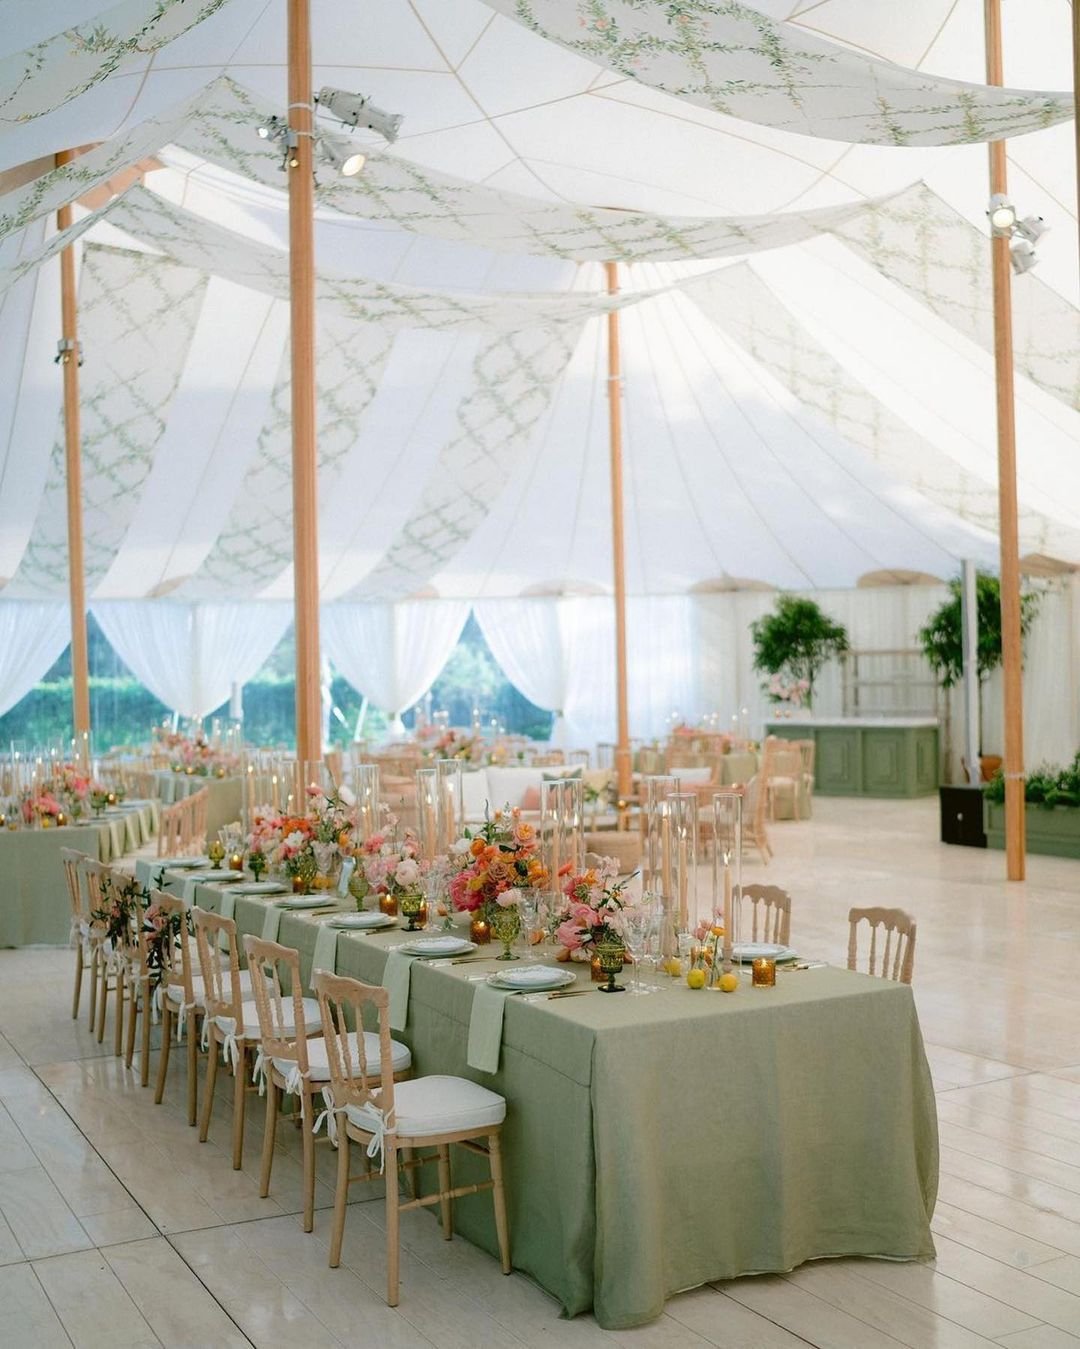 Captivated by the exquisite decor details under the Sperry Tent from @sperrytentshamptons! The use of stunning textiles creates an ambiance of elegance and charm. Drawing inspiration from this setup for your next event or wedding can elevate your cel